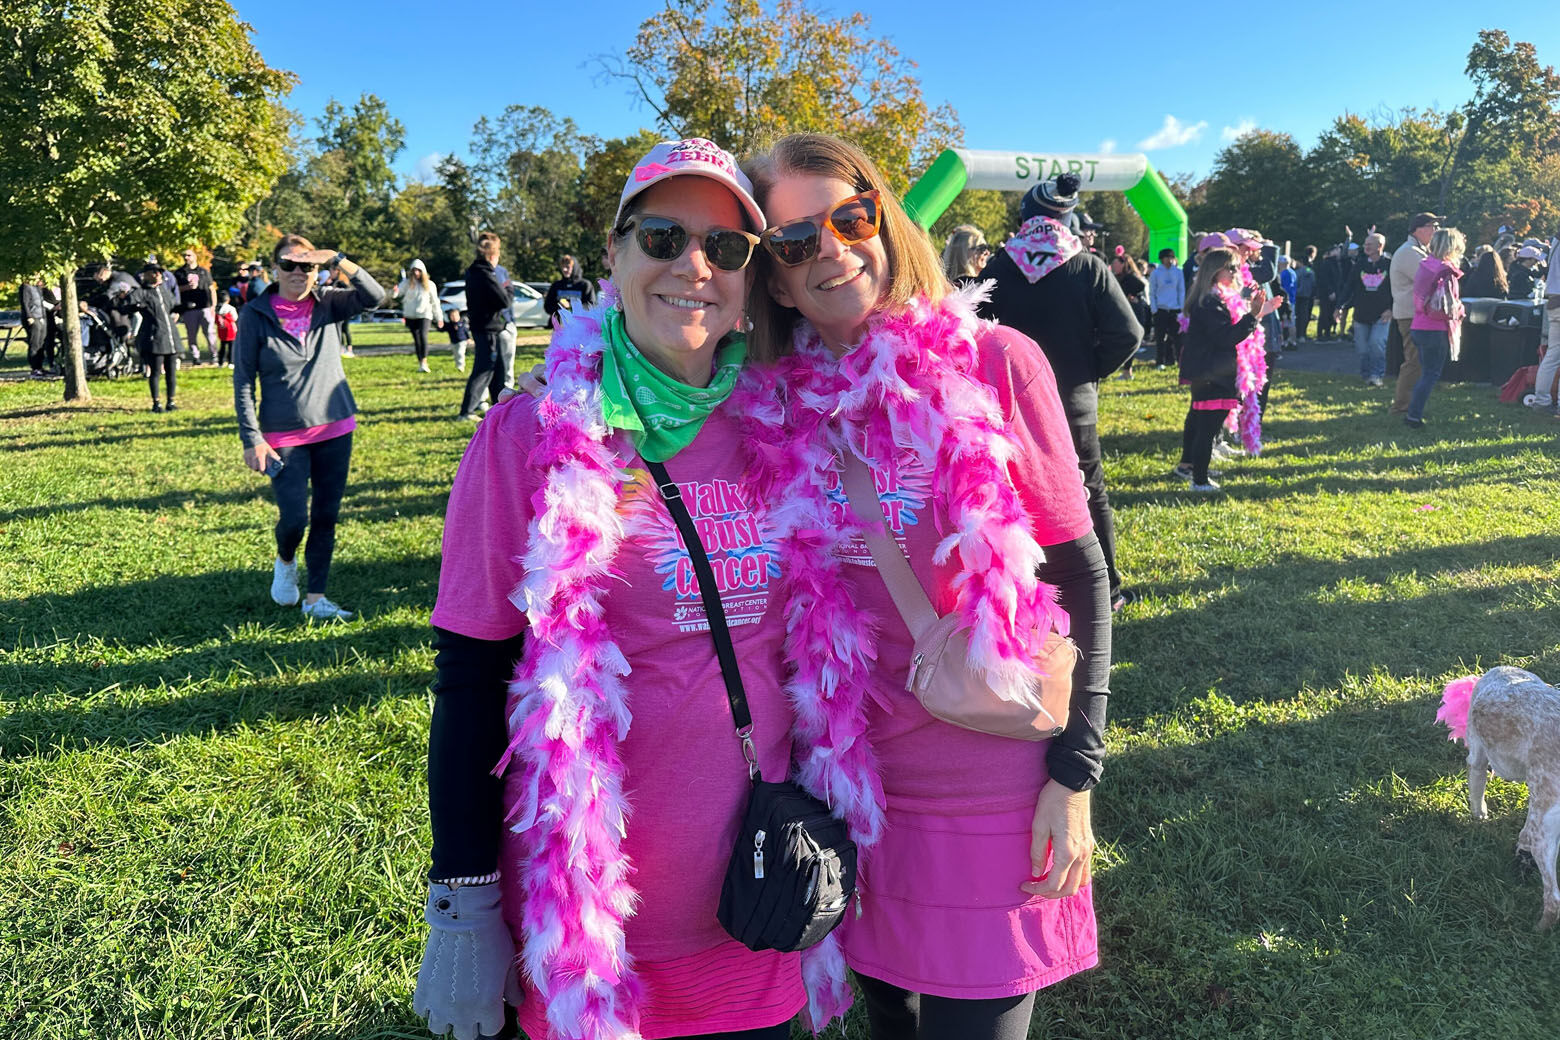 Teams of walkers, including breast cancer survivors, warriors and supporters turned out Sunday for the Walk to Bust Cancer. (WTOP/Cheyenne Corin)